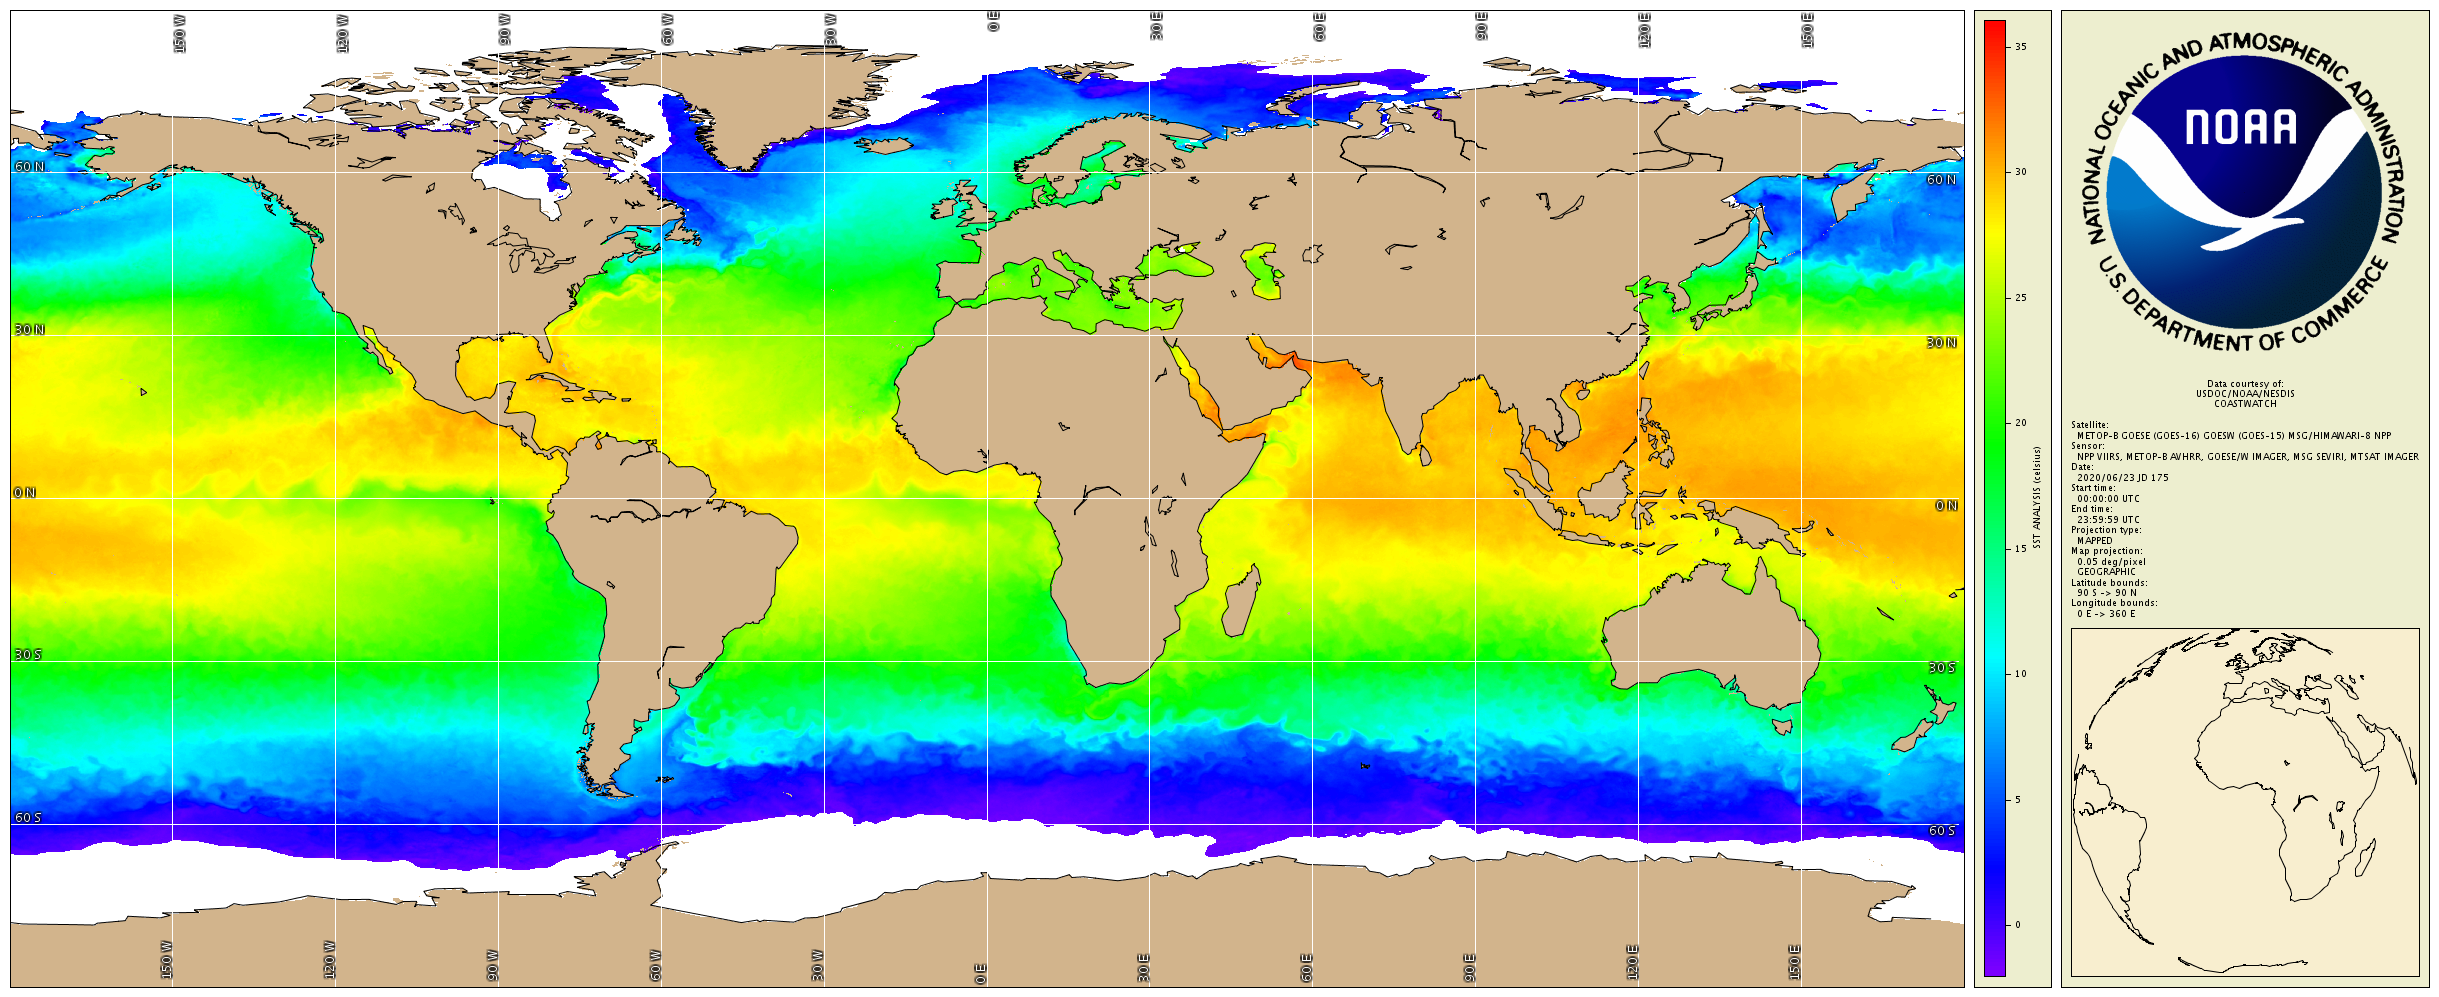 A satellite composite image of global sea surface temperatures from NOAA's next generation of Geostationary Operational Environmental Satellites (GOES-R) and the NOAA/NASA Joint Polar Satellite System (JPSS) for June 23, 2020.